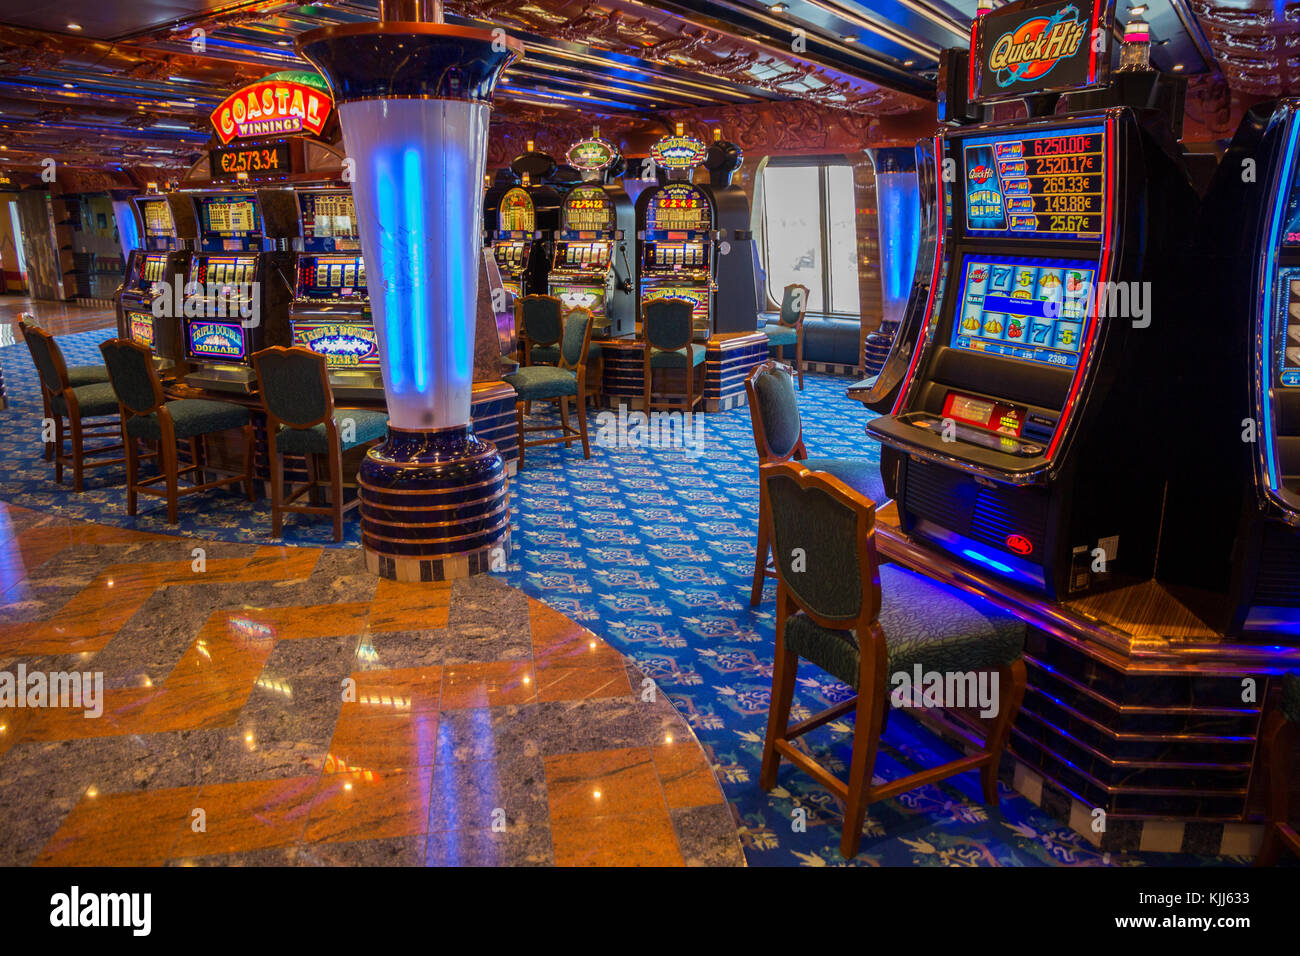 AMSTERDAM - SEP 2, 2014: Casino in the Costa Fortuna cruise ship. The ship is part of a fleet of 17 ships owned by Costa Cruises. Stock Photo